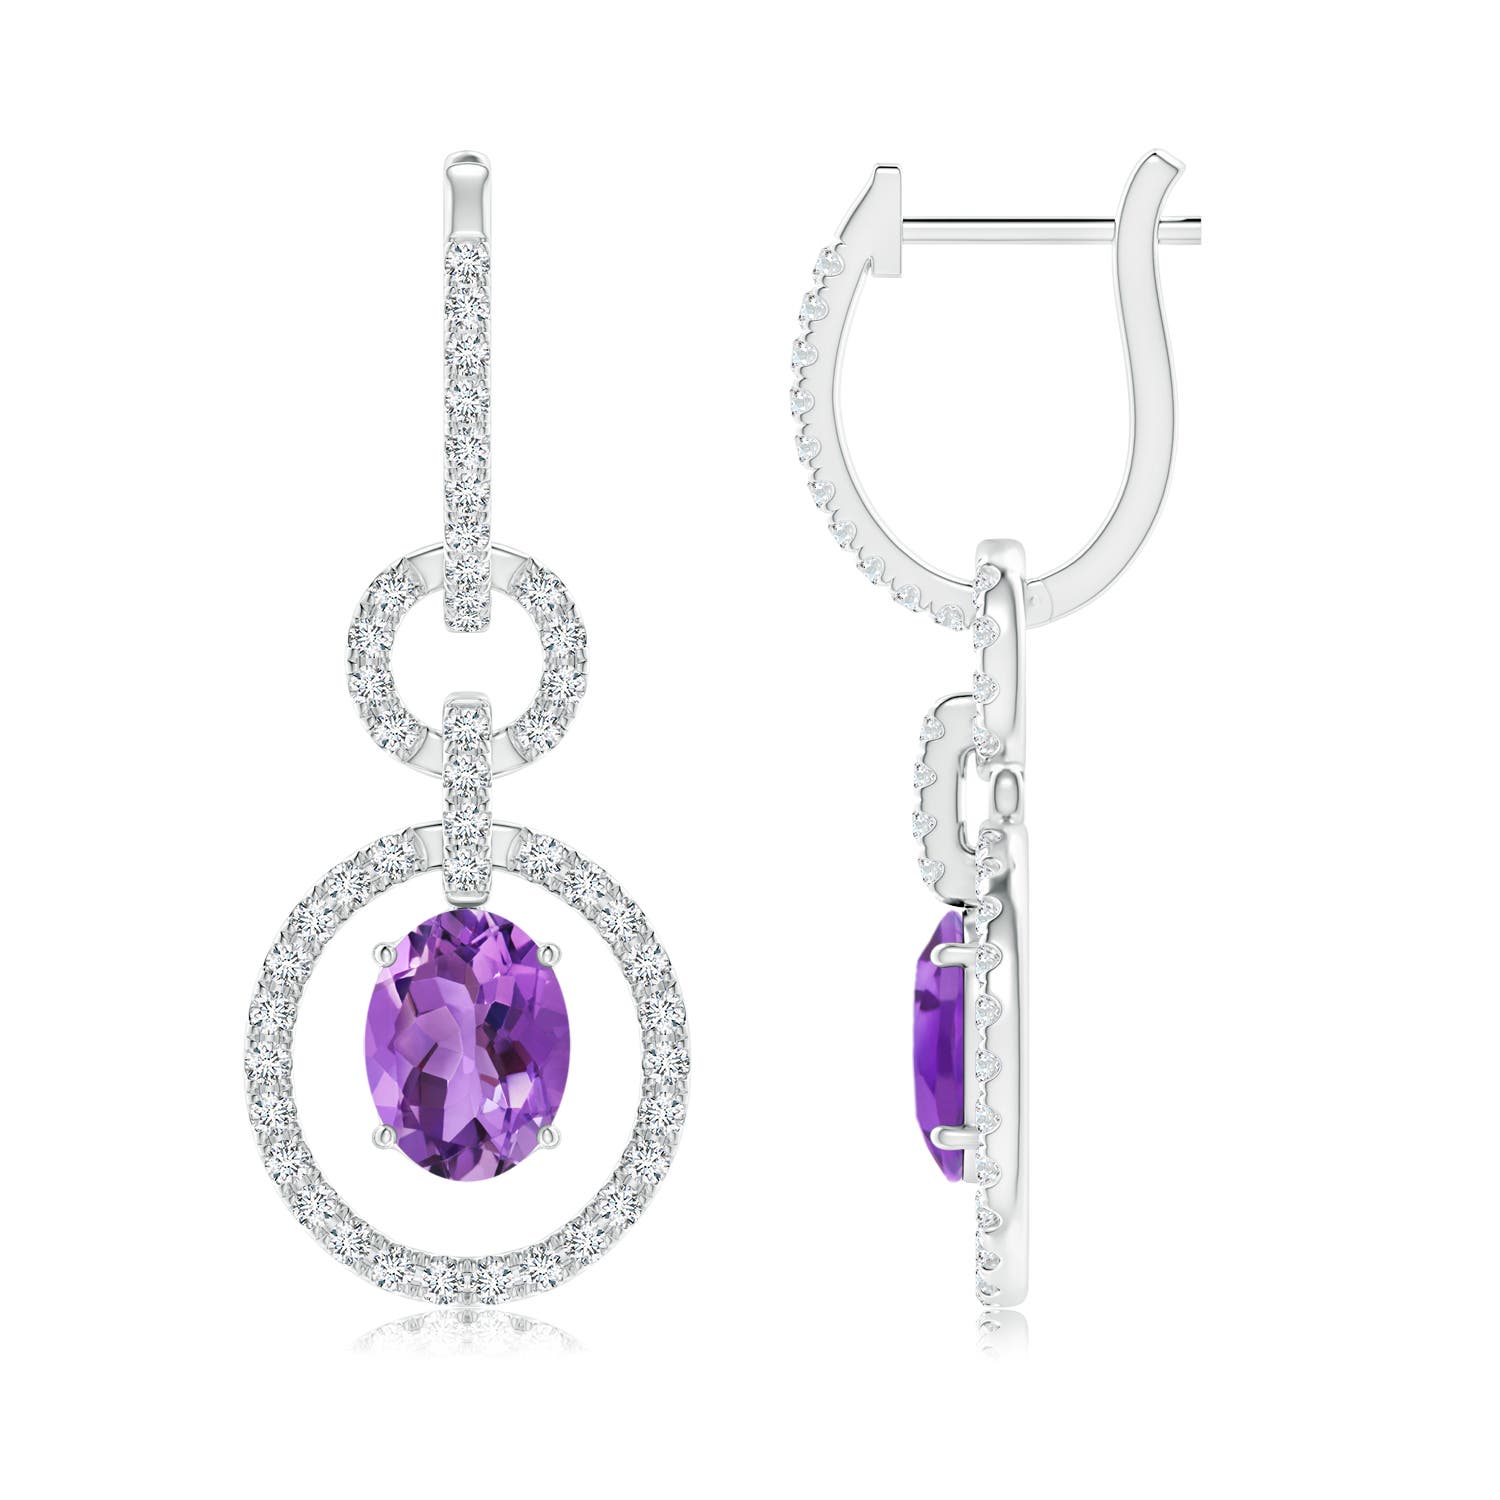 AA - Amethyst / 3.08 CT / 14 KT White Gold